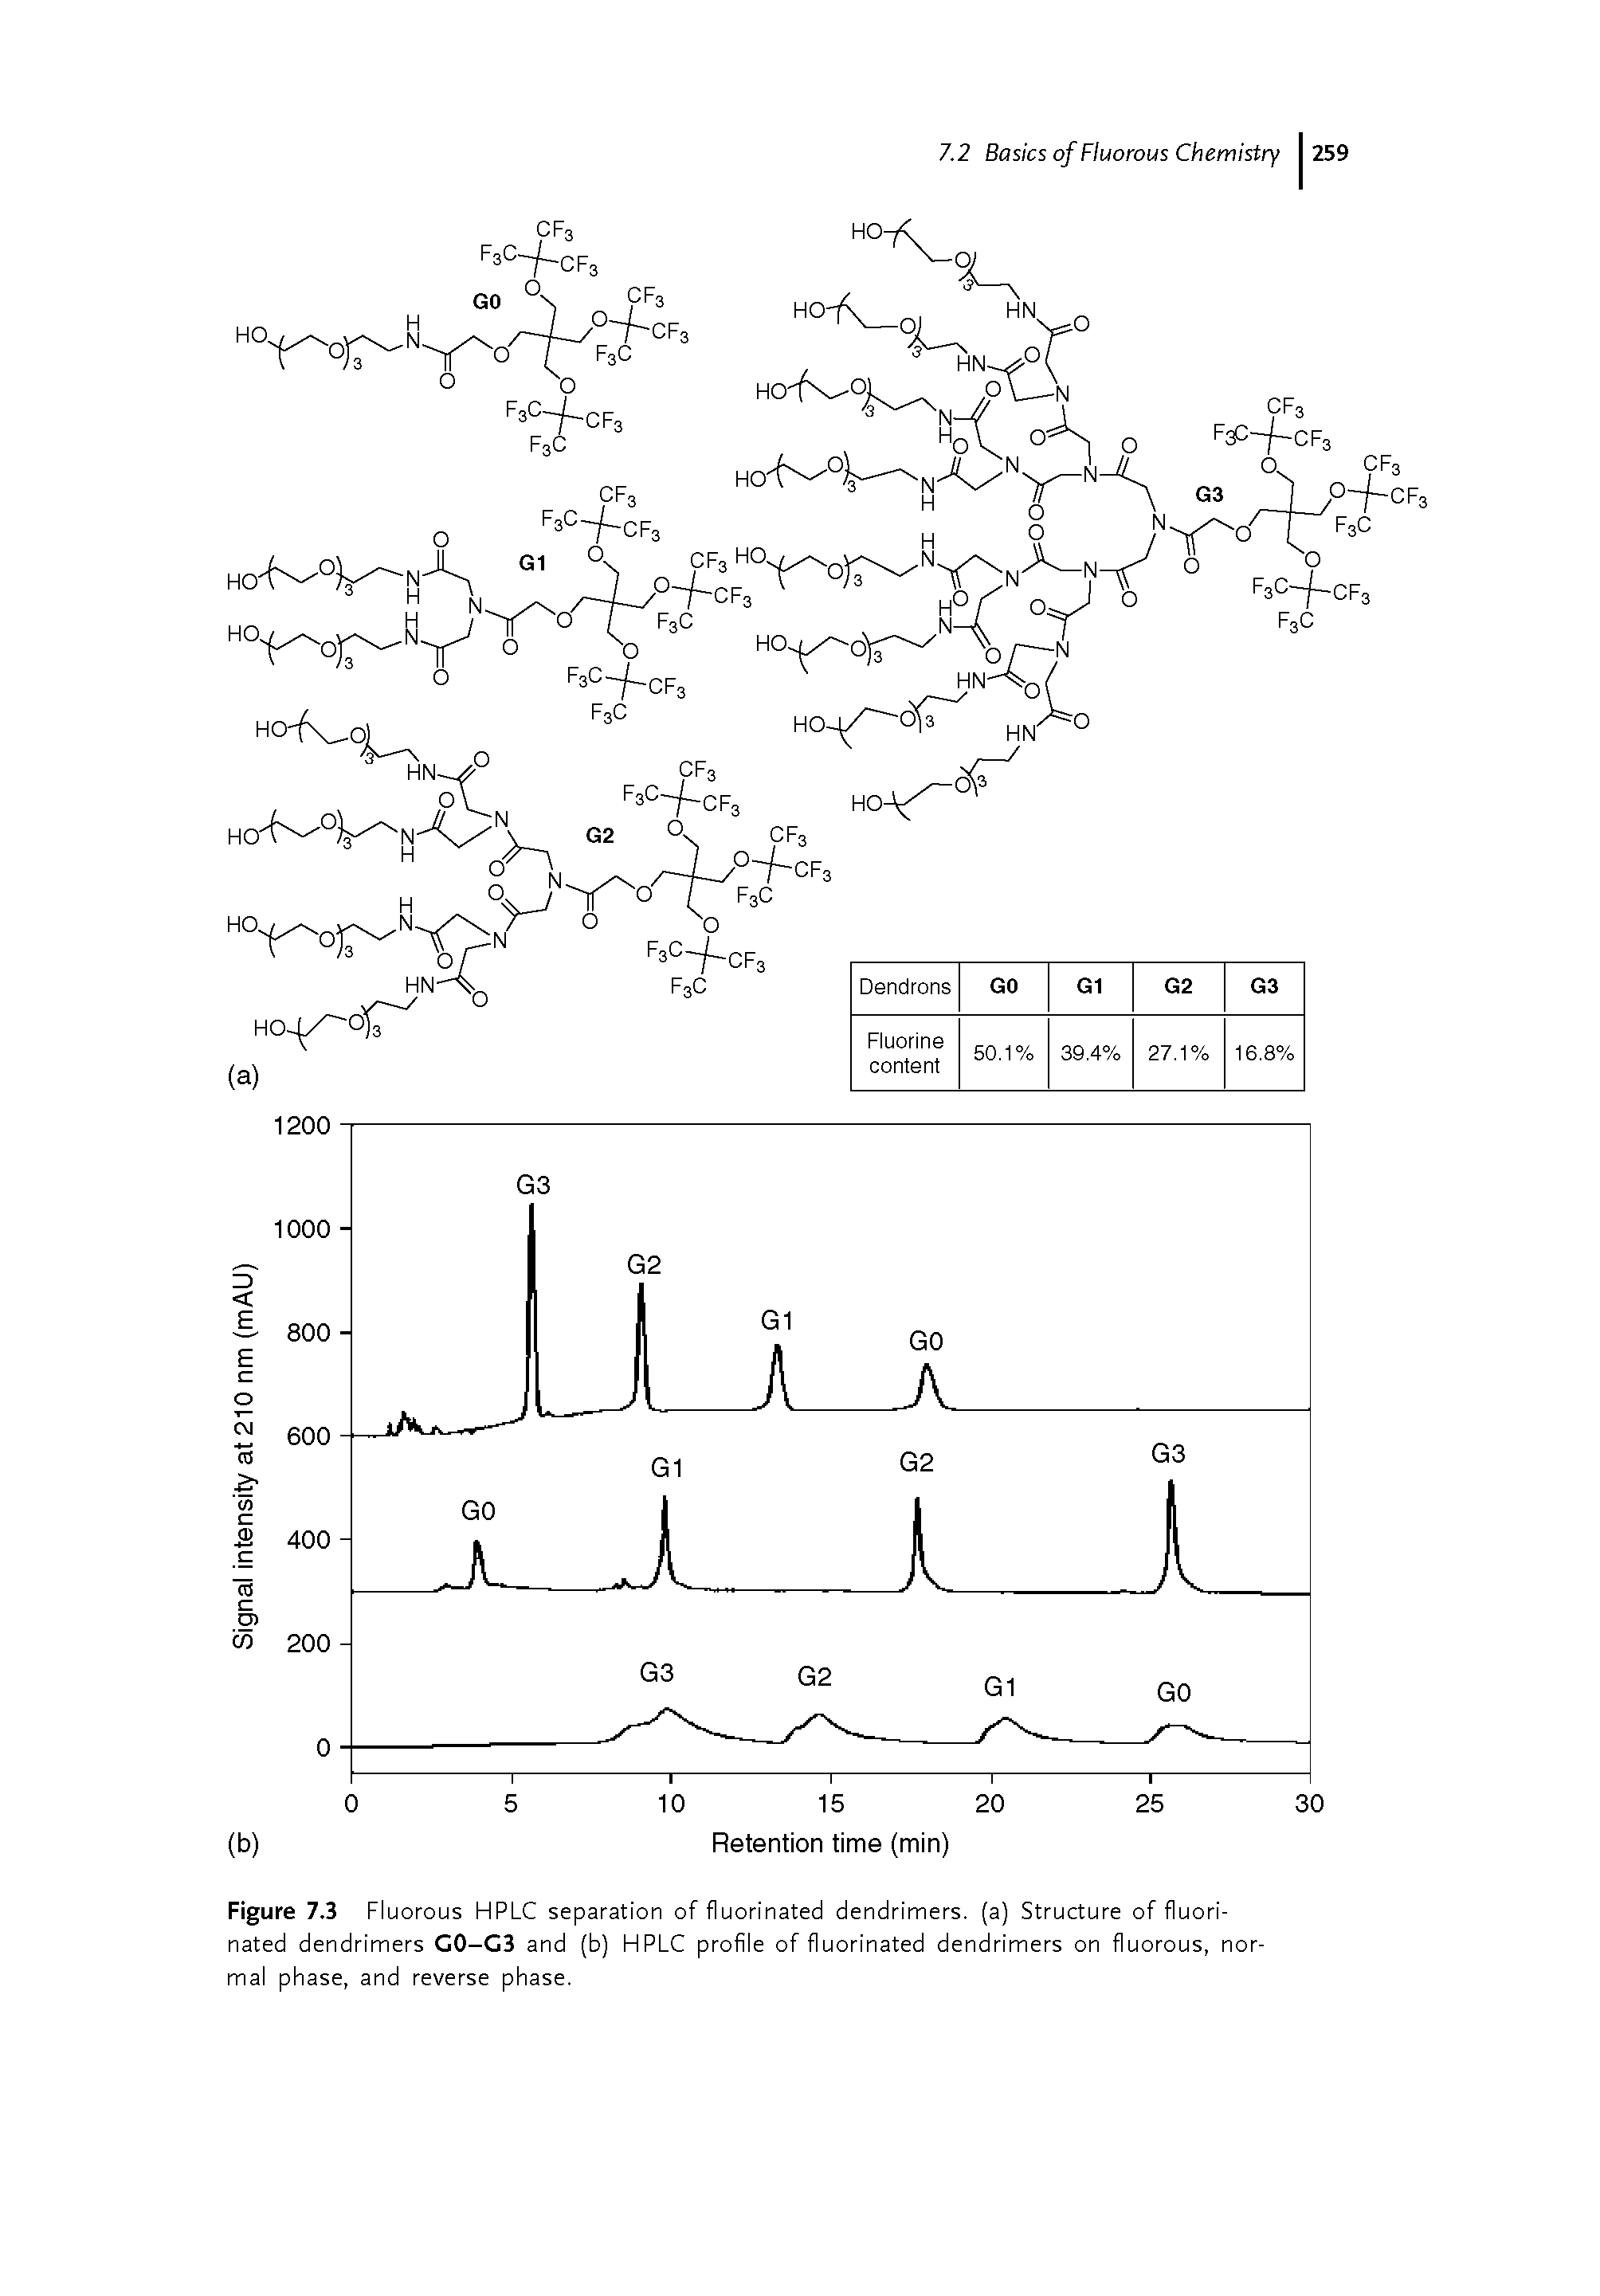 Figure 7.3 Fluorous HPLC separation of fluorinated dendrimers. (a) Structure of fluori-nated dendrimers C0-C3 and (b) HPLC profile of fluorinated dendrimers on fluorous, normal phase, and reverse phase.